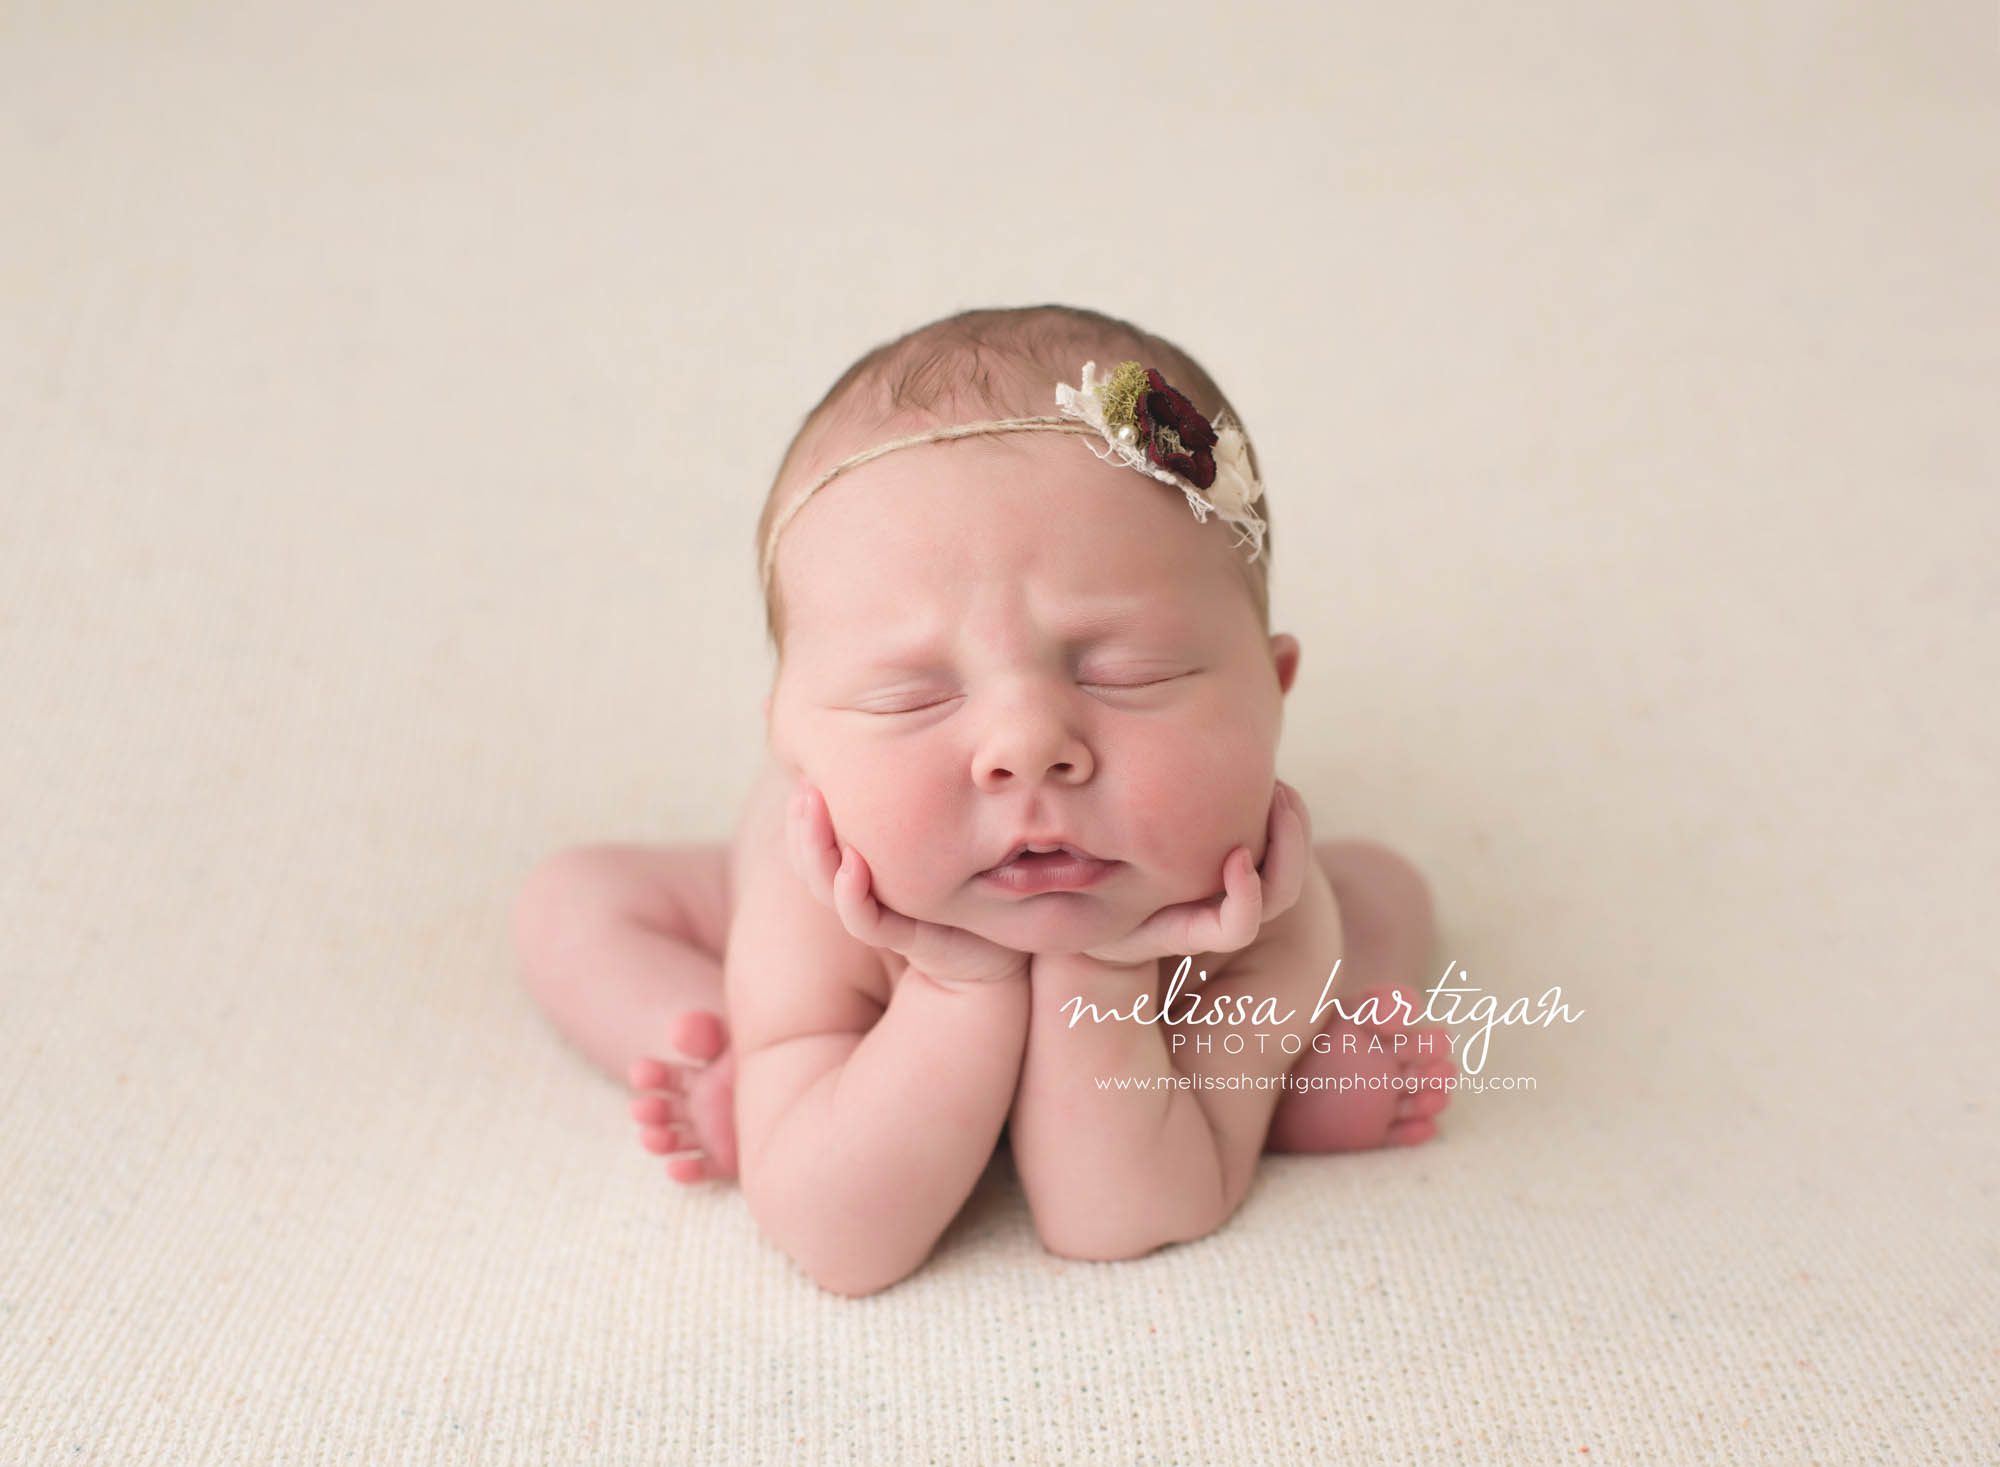 Melissa Hartigan Photography Connecticut Newborn Photographer Coventry Ct Middlefield CT baby Fairfield county Baby girl froggy pose cream headband on pale pink blanket sleeping CT newborn session